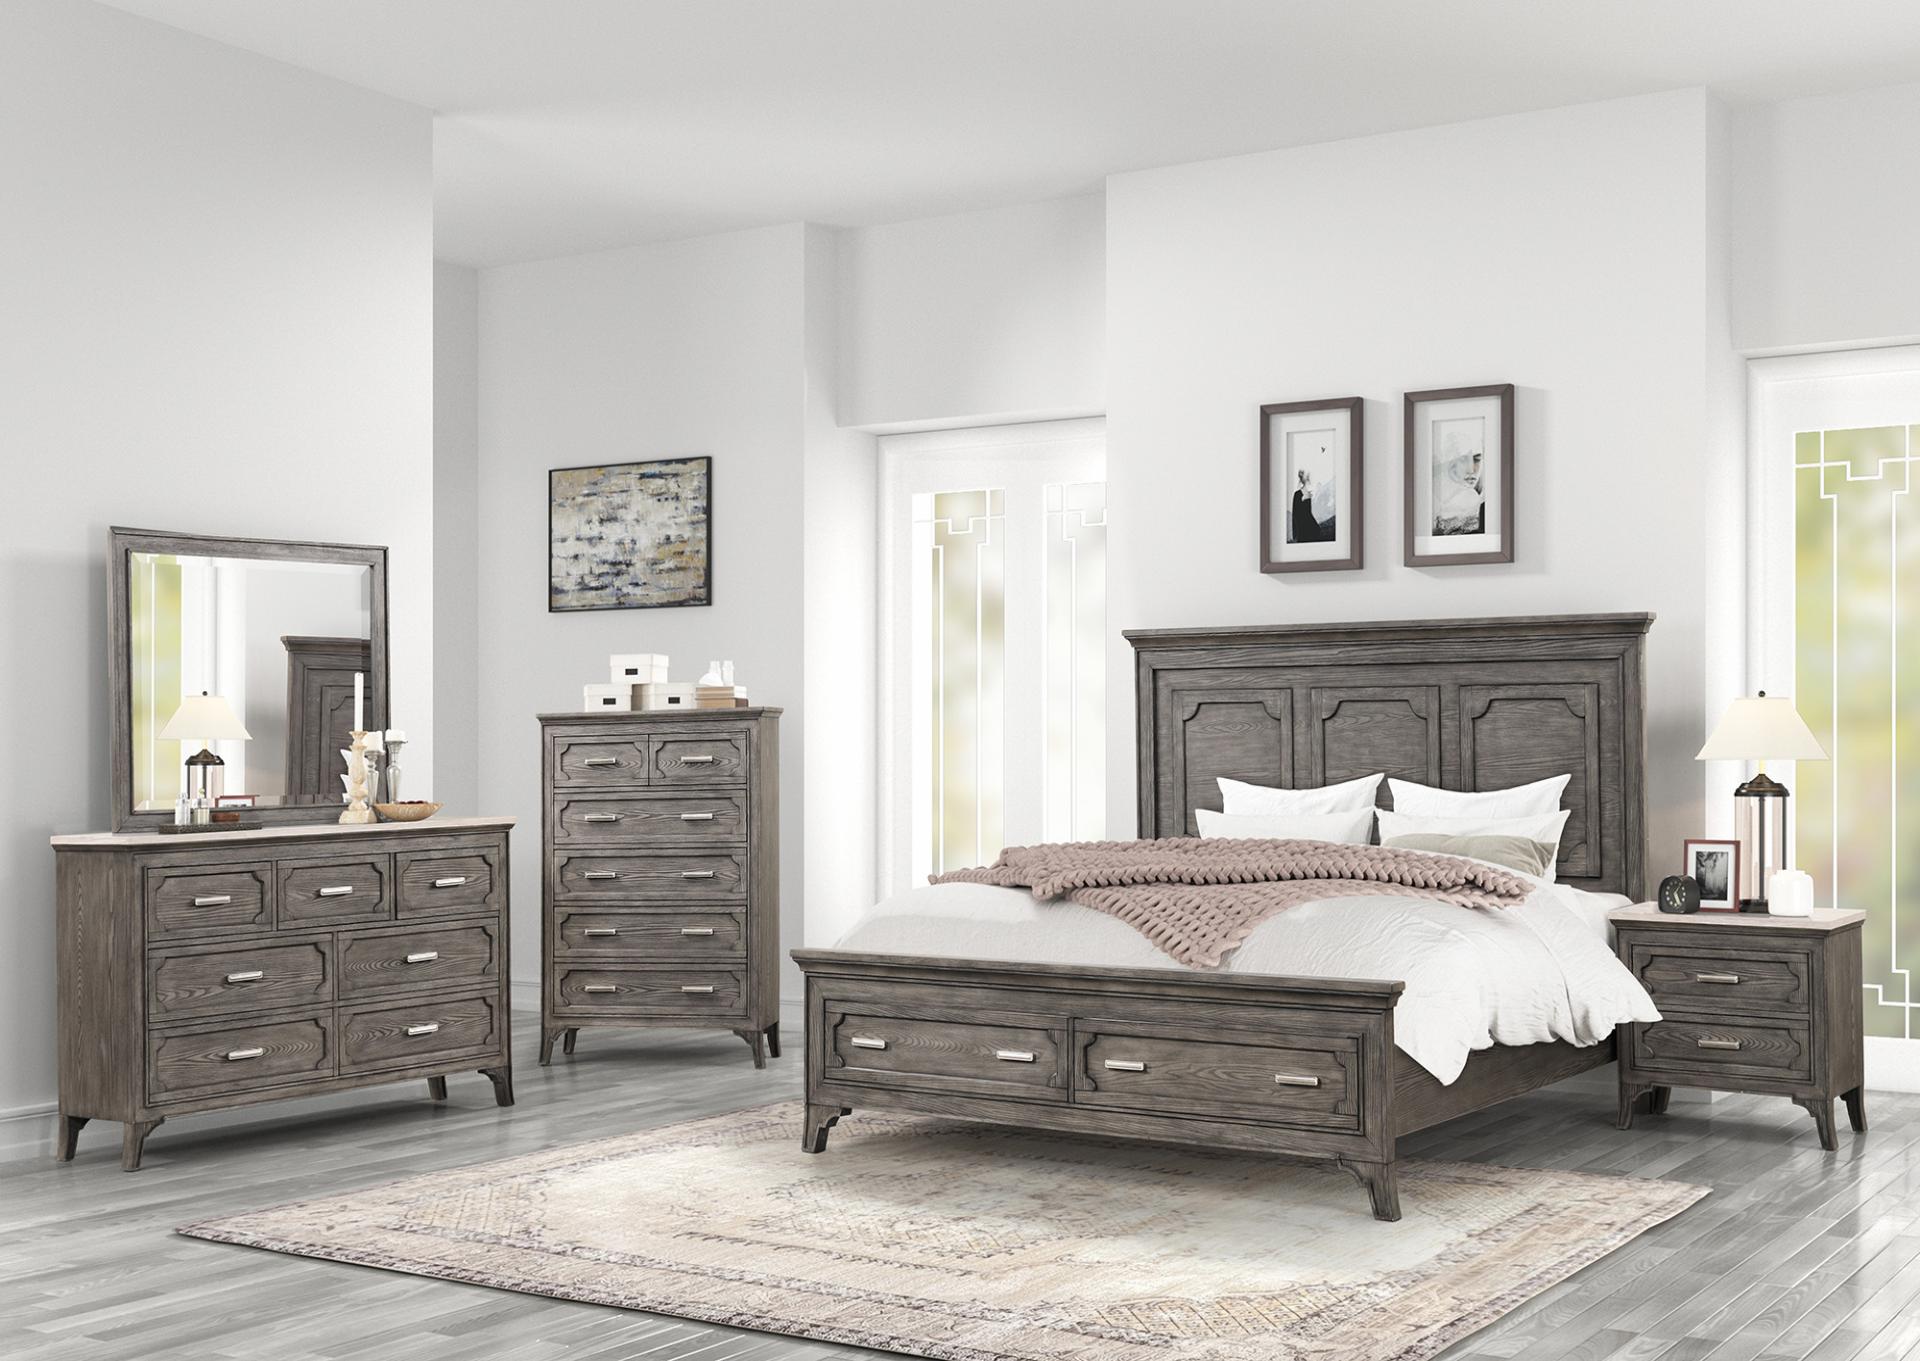 Panel Storage bed with 2 drawers, dresser, mirror, and nightstand